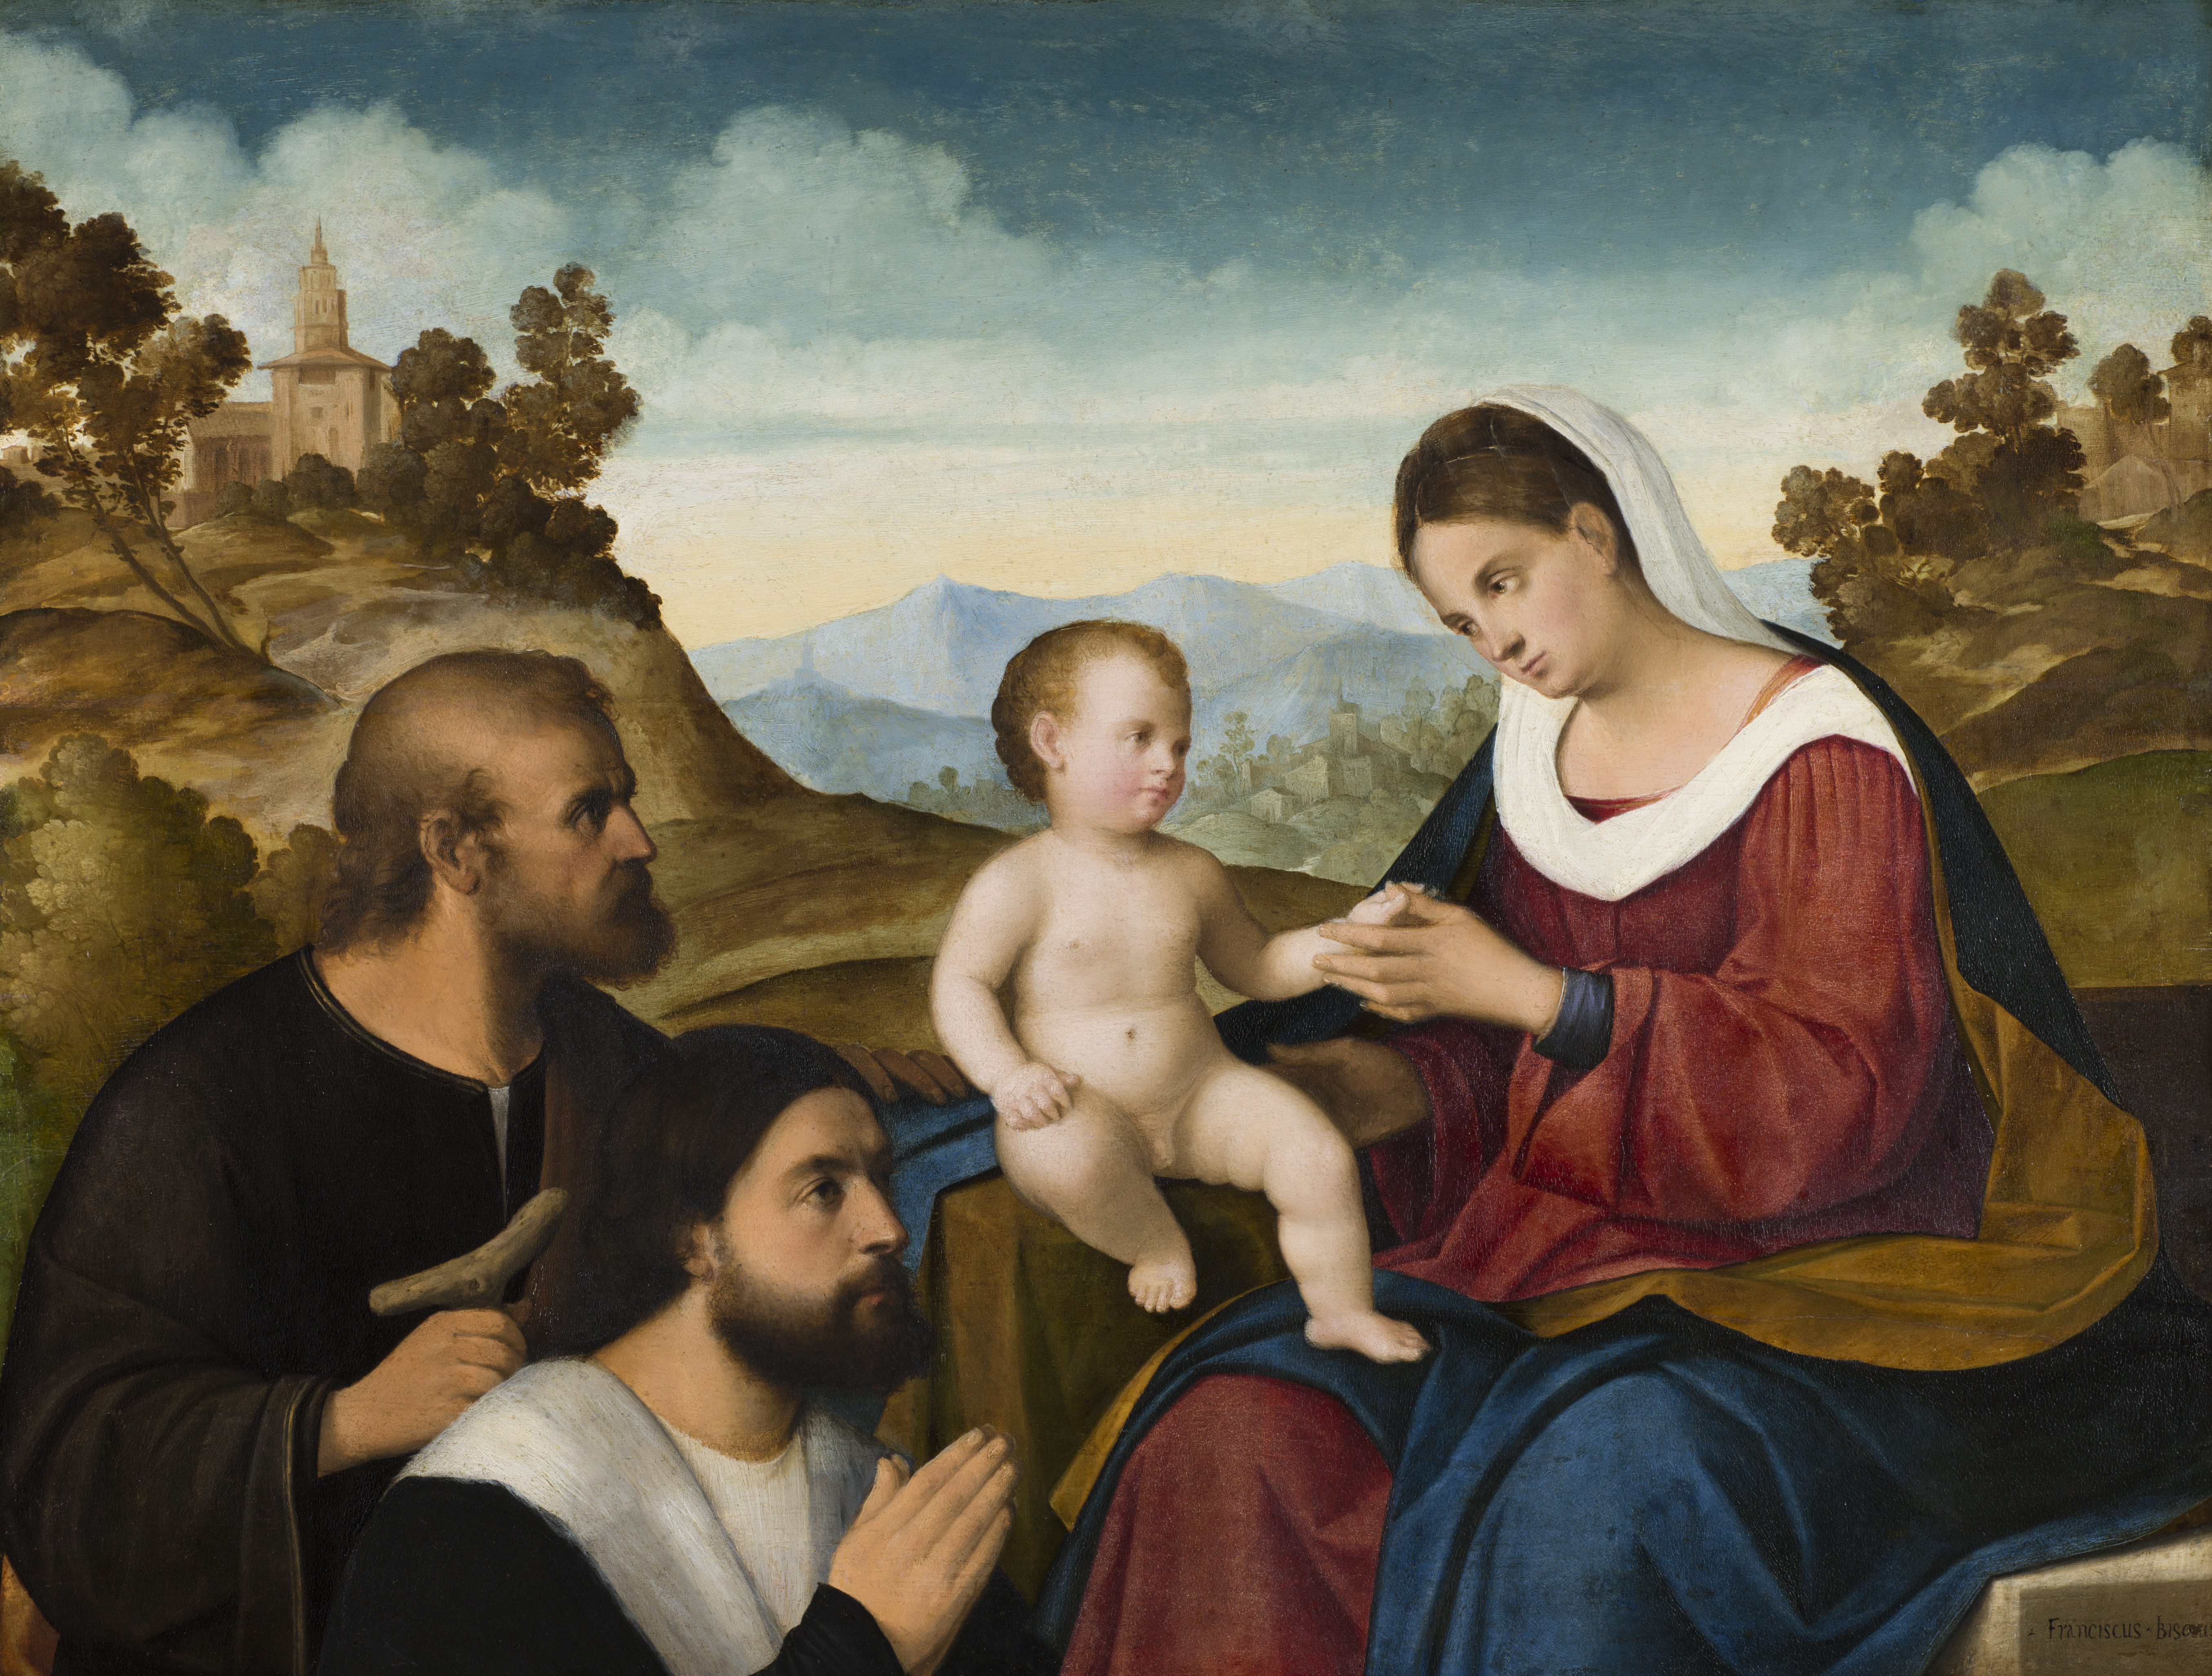 Restoration work on Pier Francesco Bissolo "The Holy Family with a Donor in a Landscape" This included removing yellowed varnish, cleaning the painting, painting over details that appeared to have been added later, and applying a new varnish.  The painting will be on display in the exhibition 